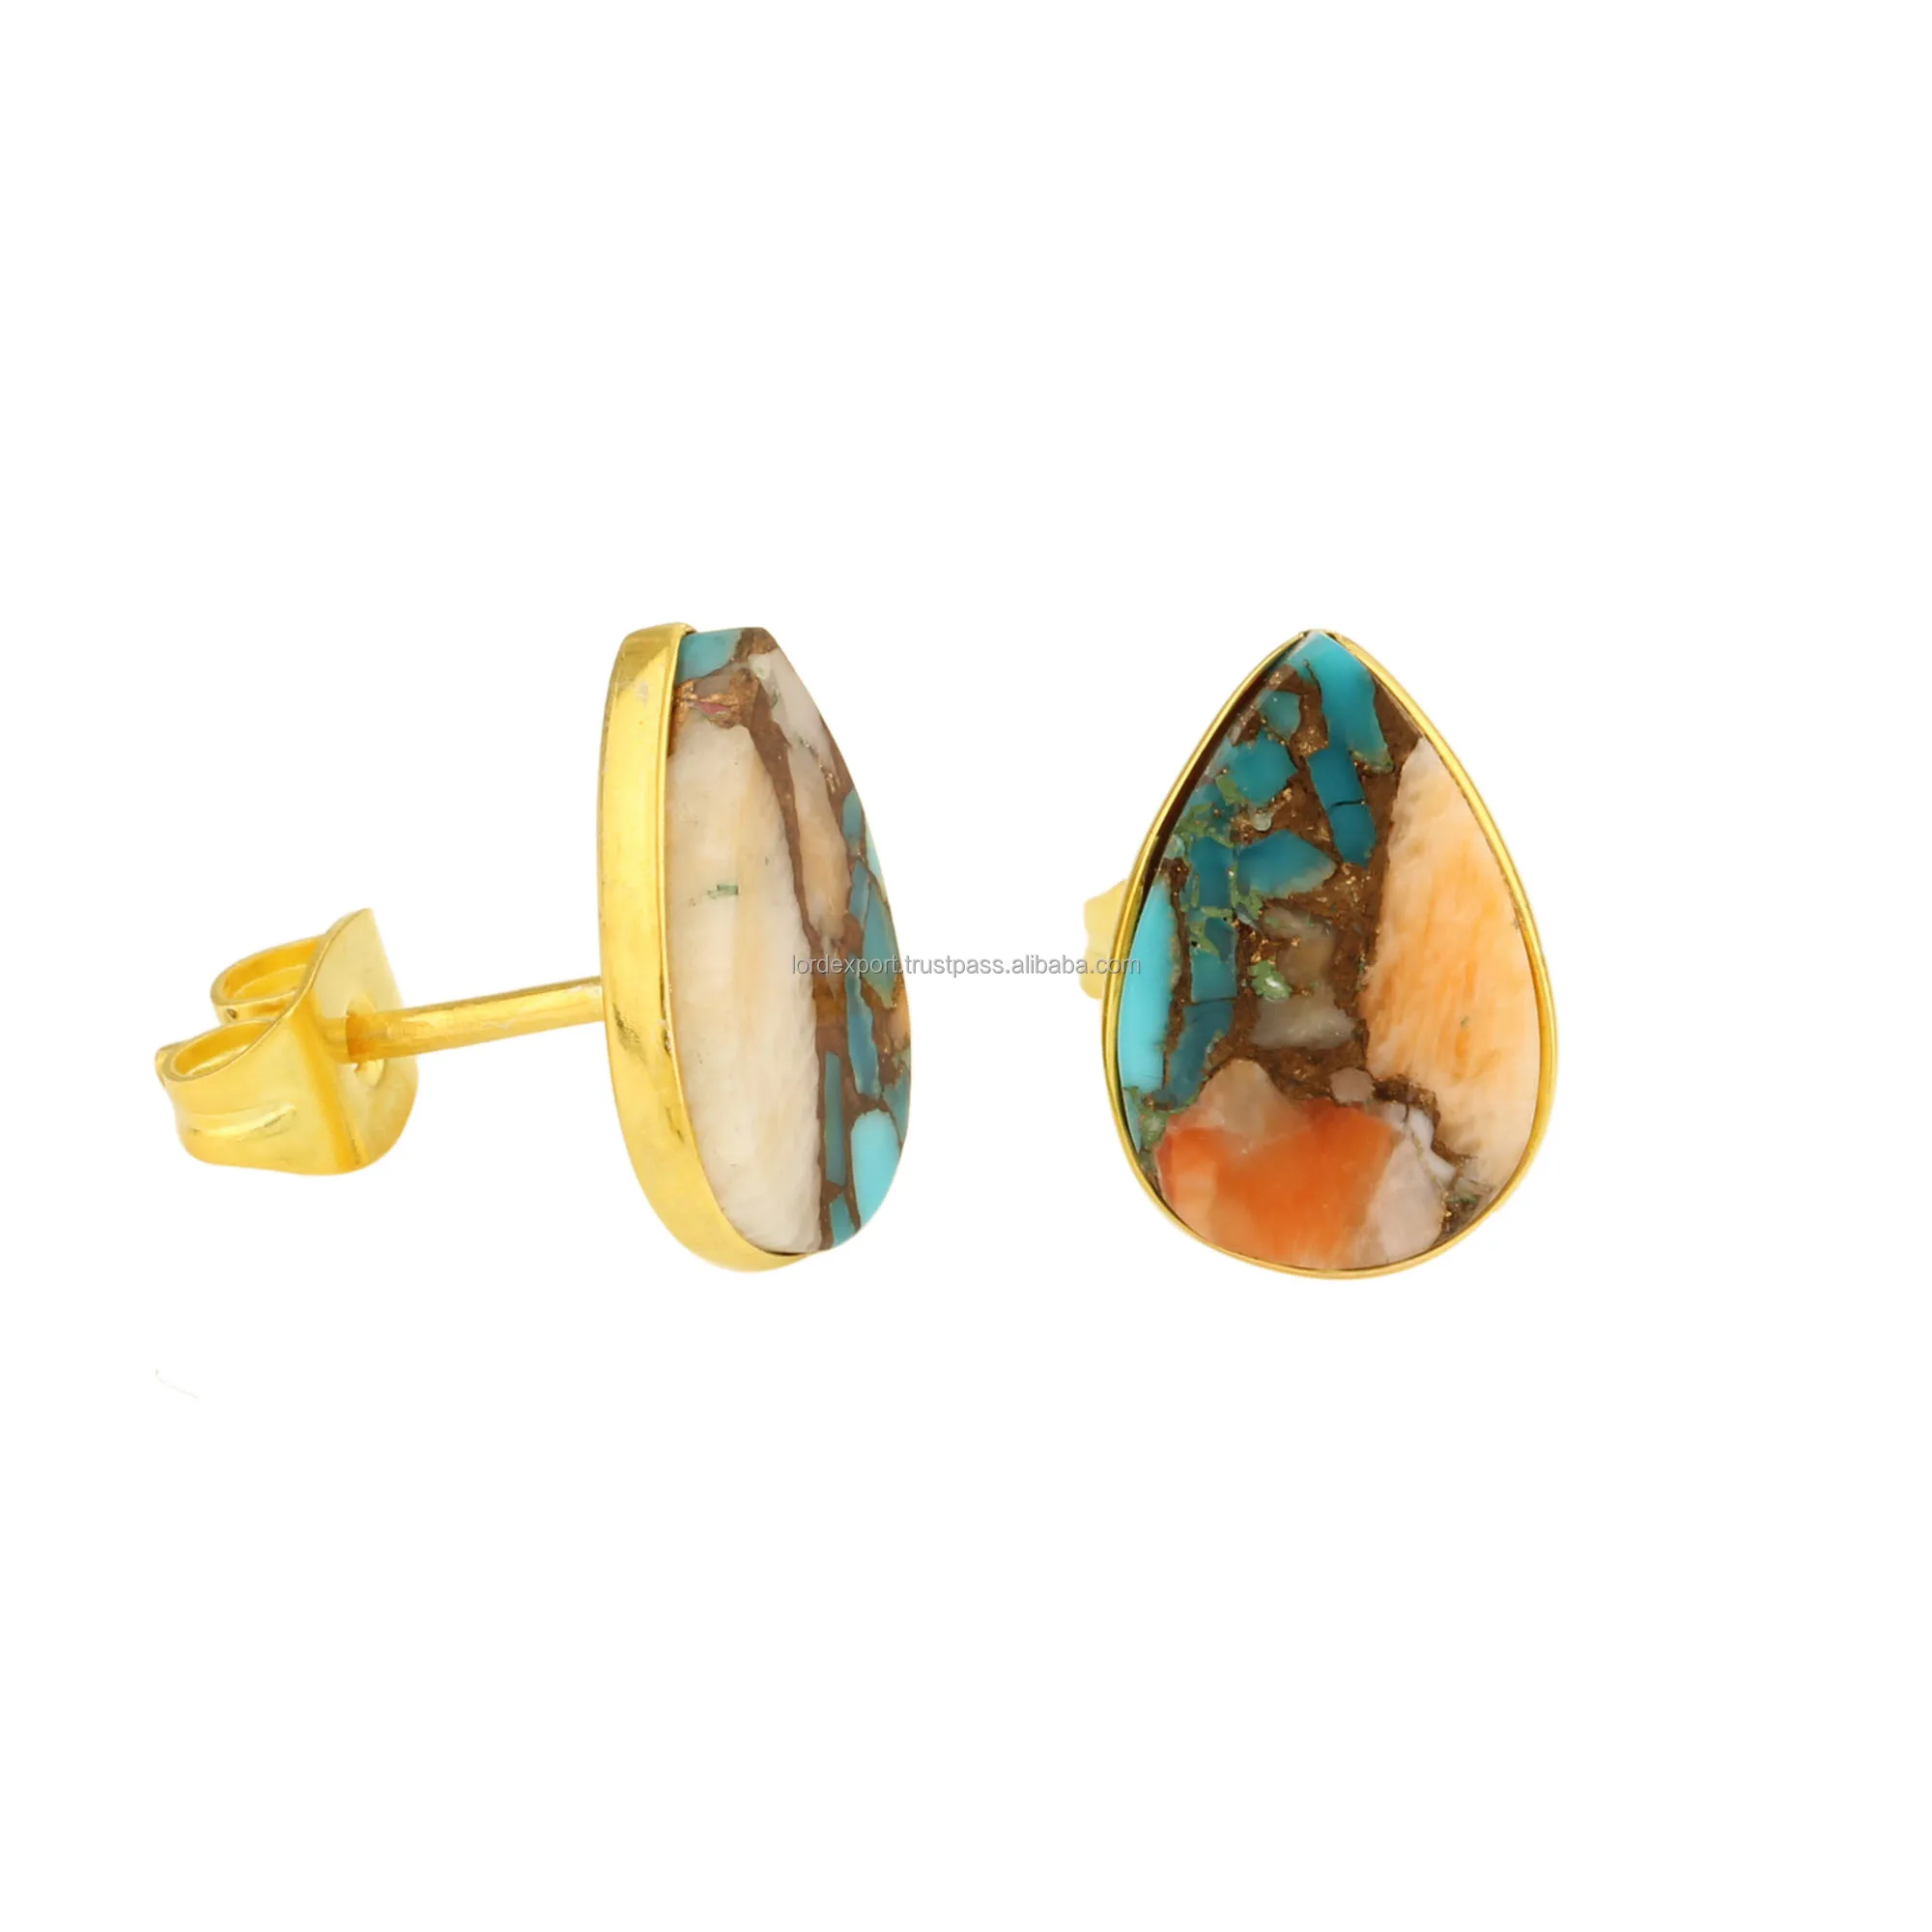 Details about   Arizona Turquoise Gemstone Gold Plated 925 Silver Dangle Earrings Jewelry 